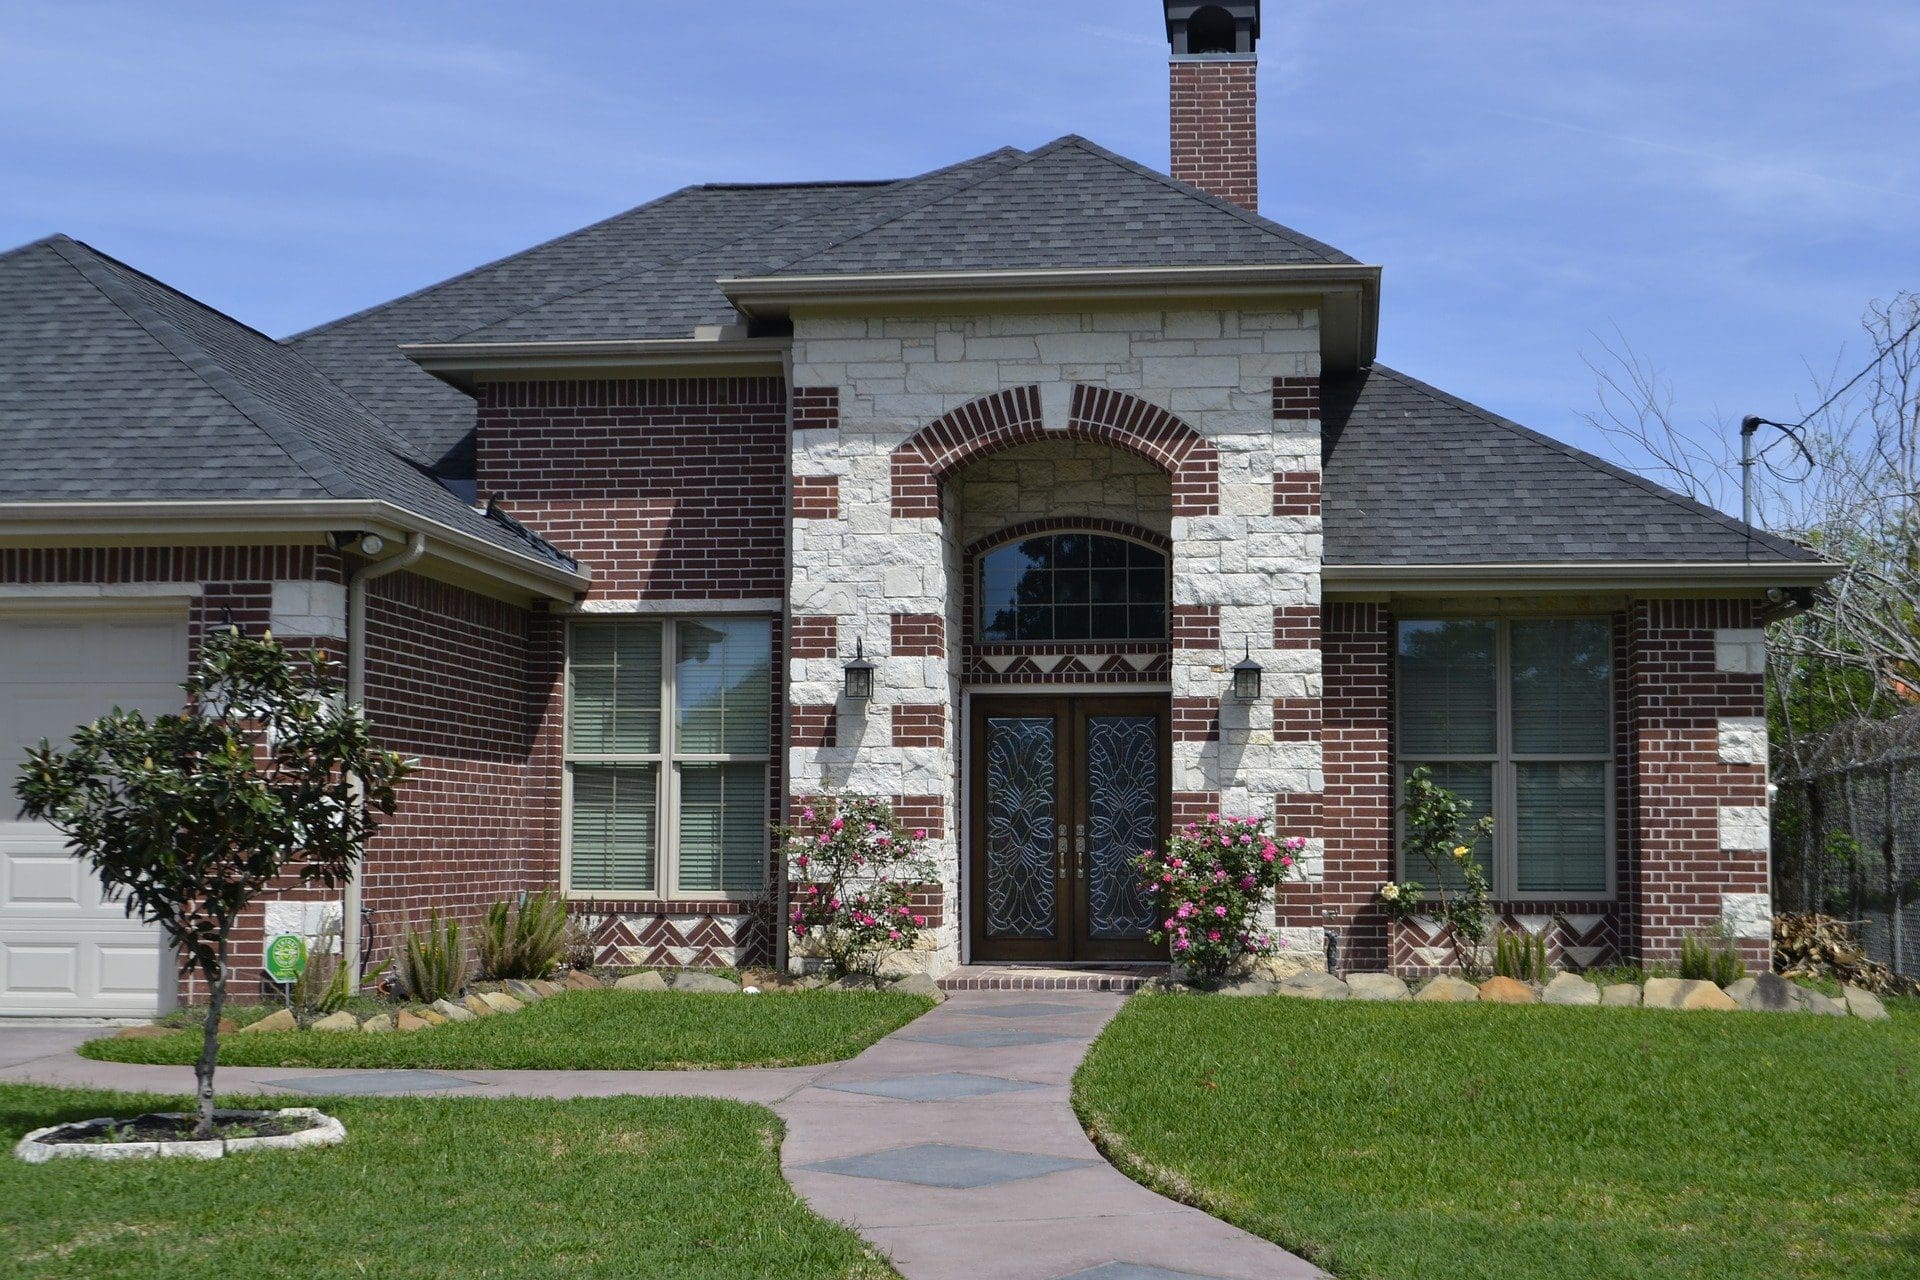 beautiful professional roofing little rock arkansas local roof builder roof installation shingles